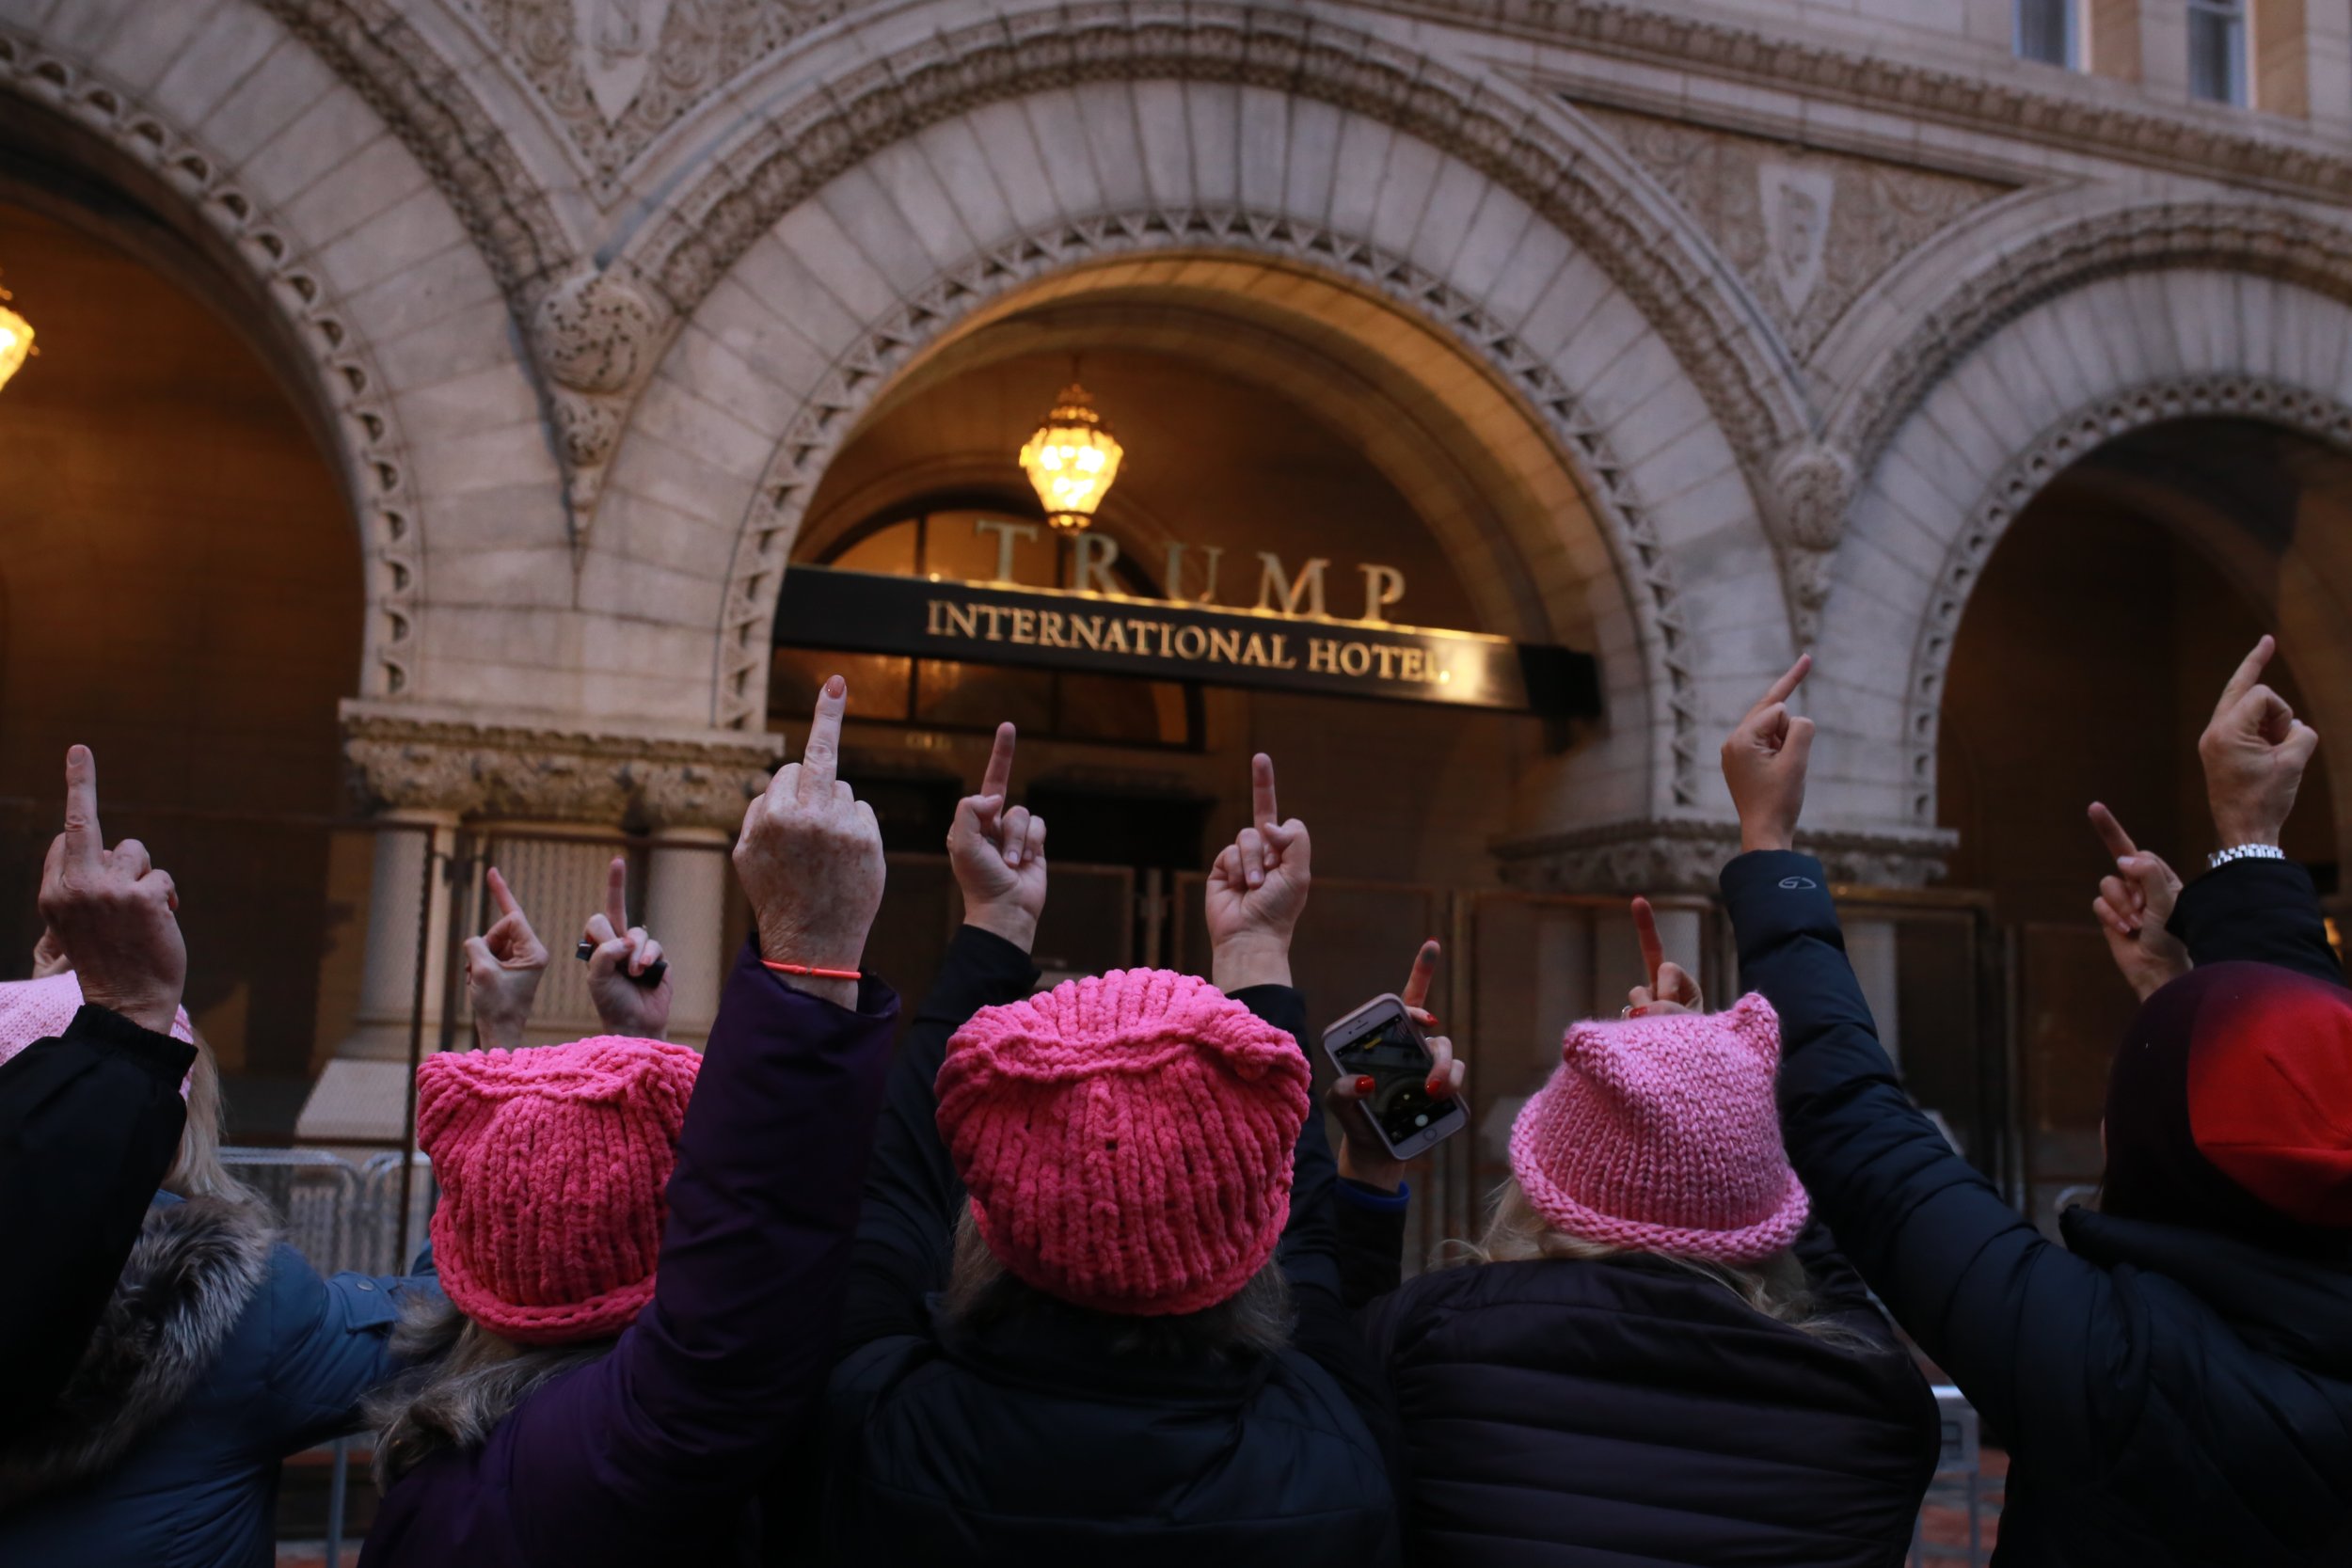  The Naglieri family flip off Trump International Hotel during the Womens March On Washington. ‬"He's made it permissible to be vile, so we're being vile," said Jack Naglieri. "I don't normally stand on the street flipping people off but if he wants 